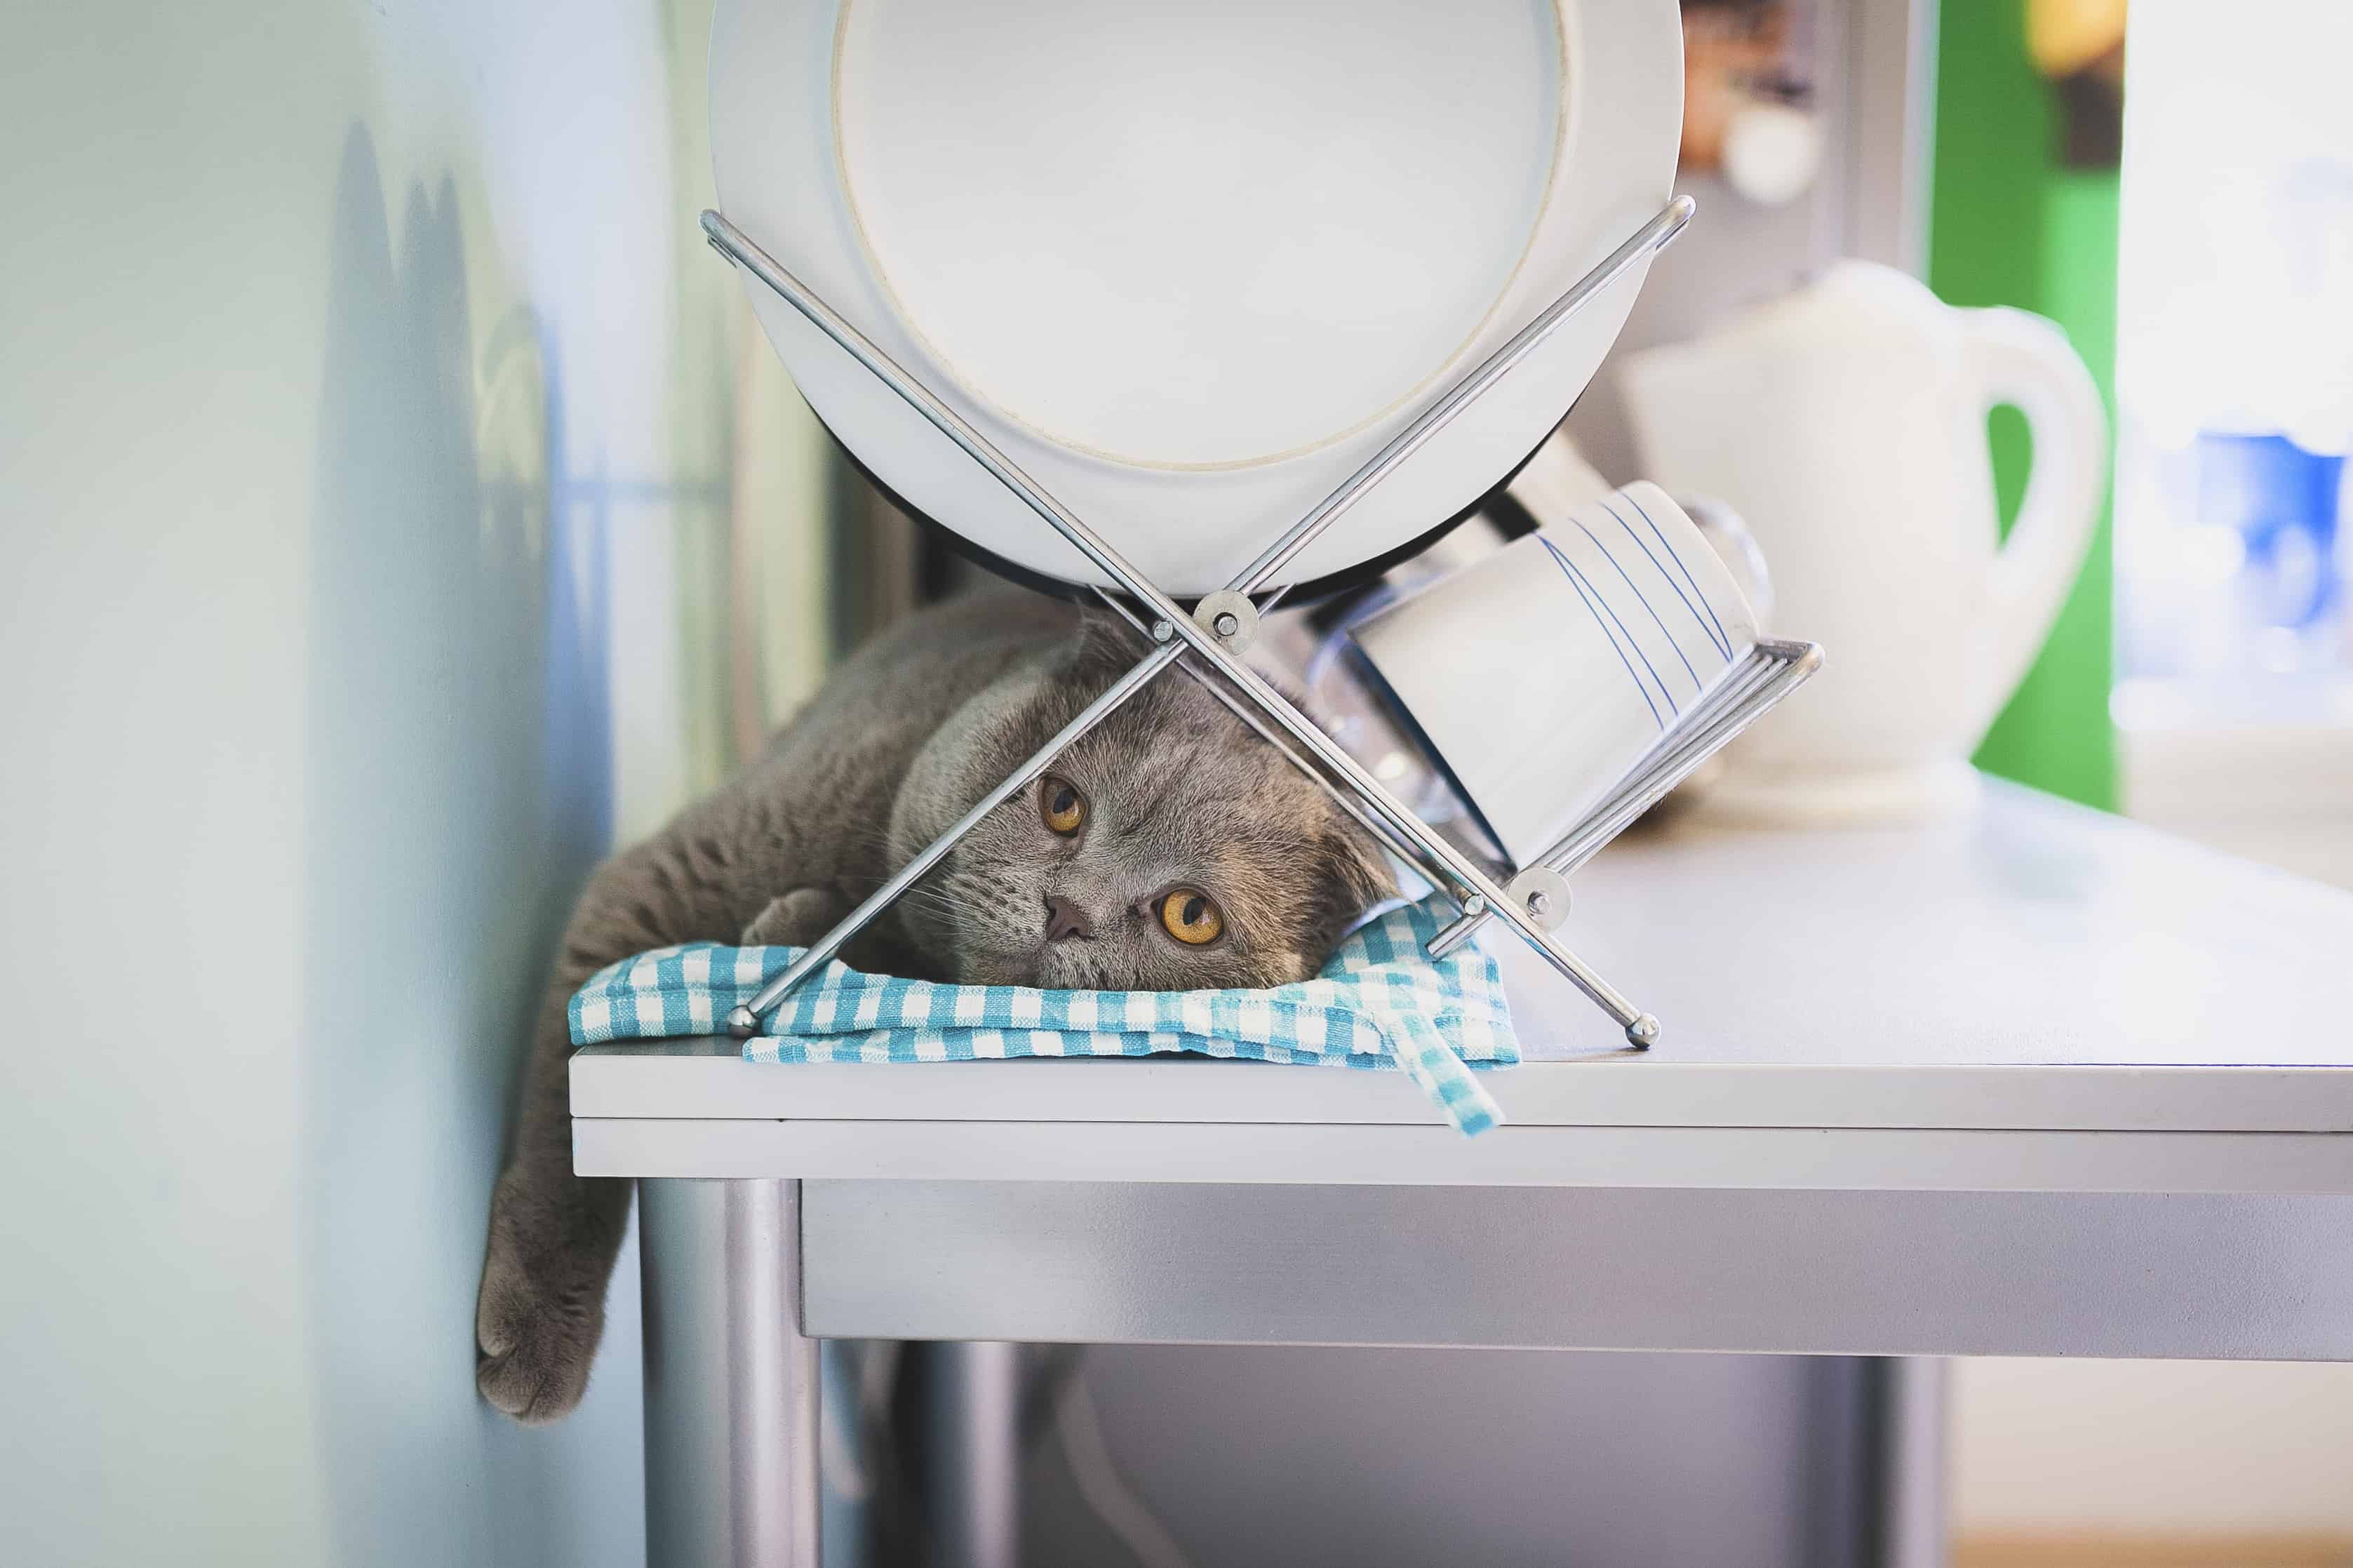 Lazy cat lying under the dish drainer in the kitchen